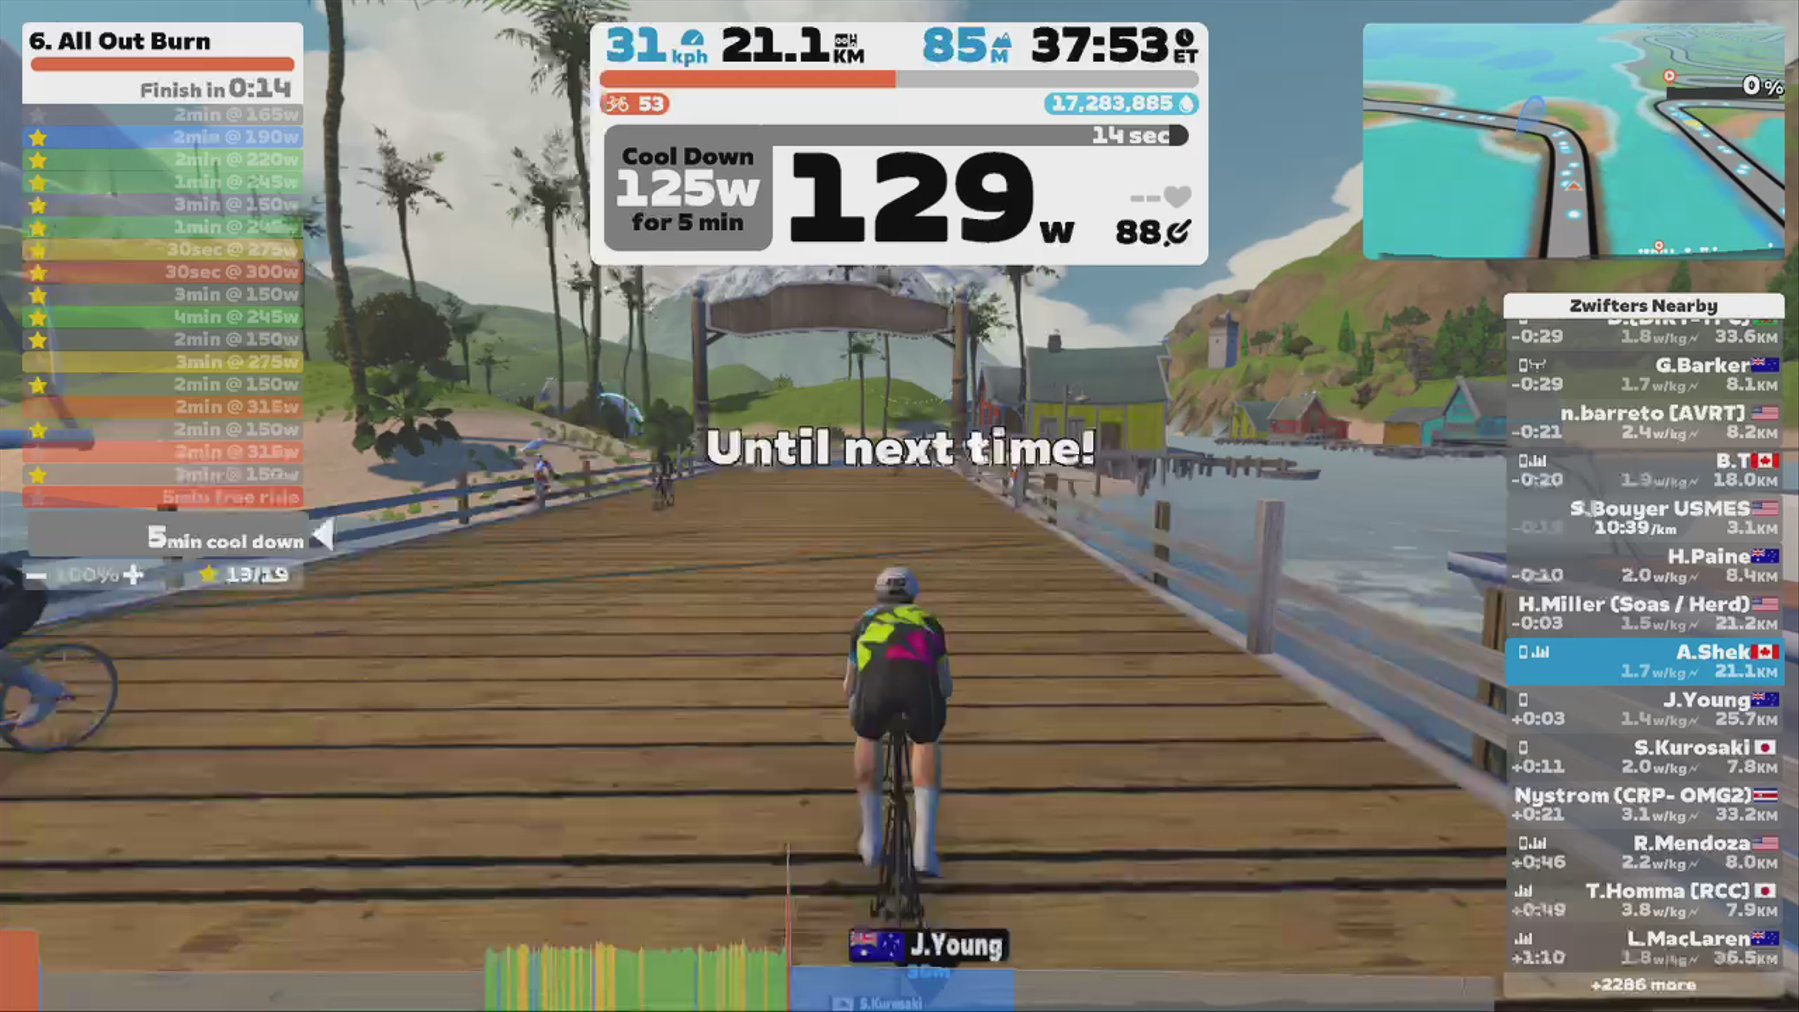 Zwift - Zwift Academy: Workout 6 | All Out Burn in Watopia